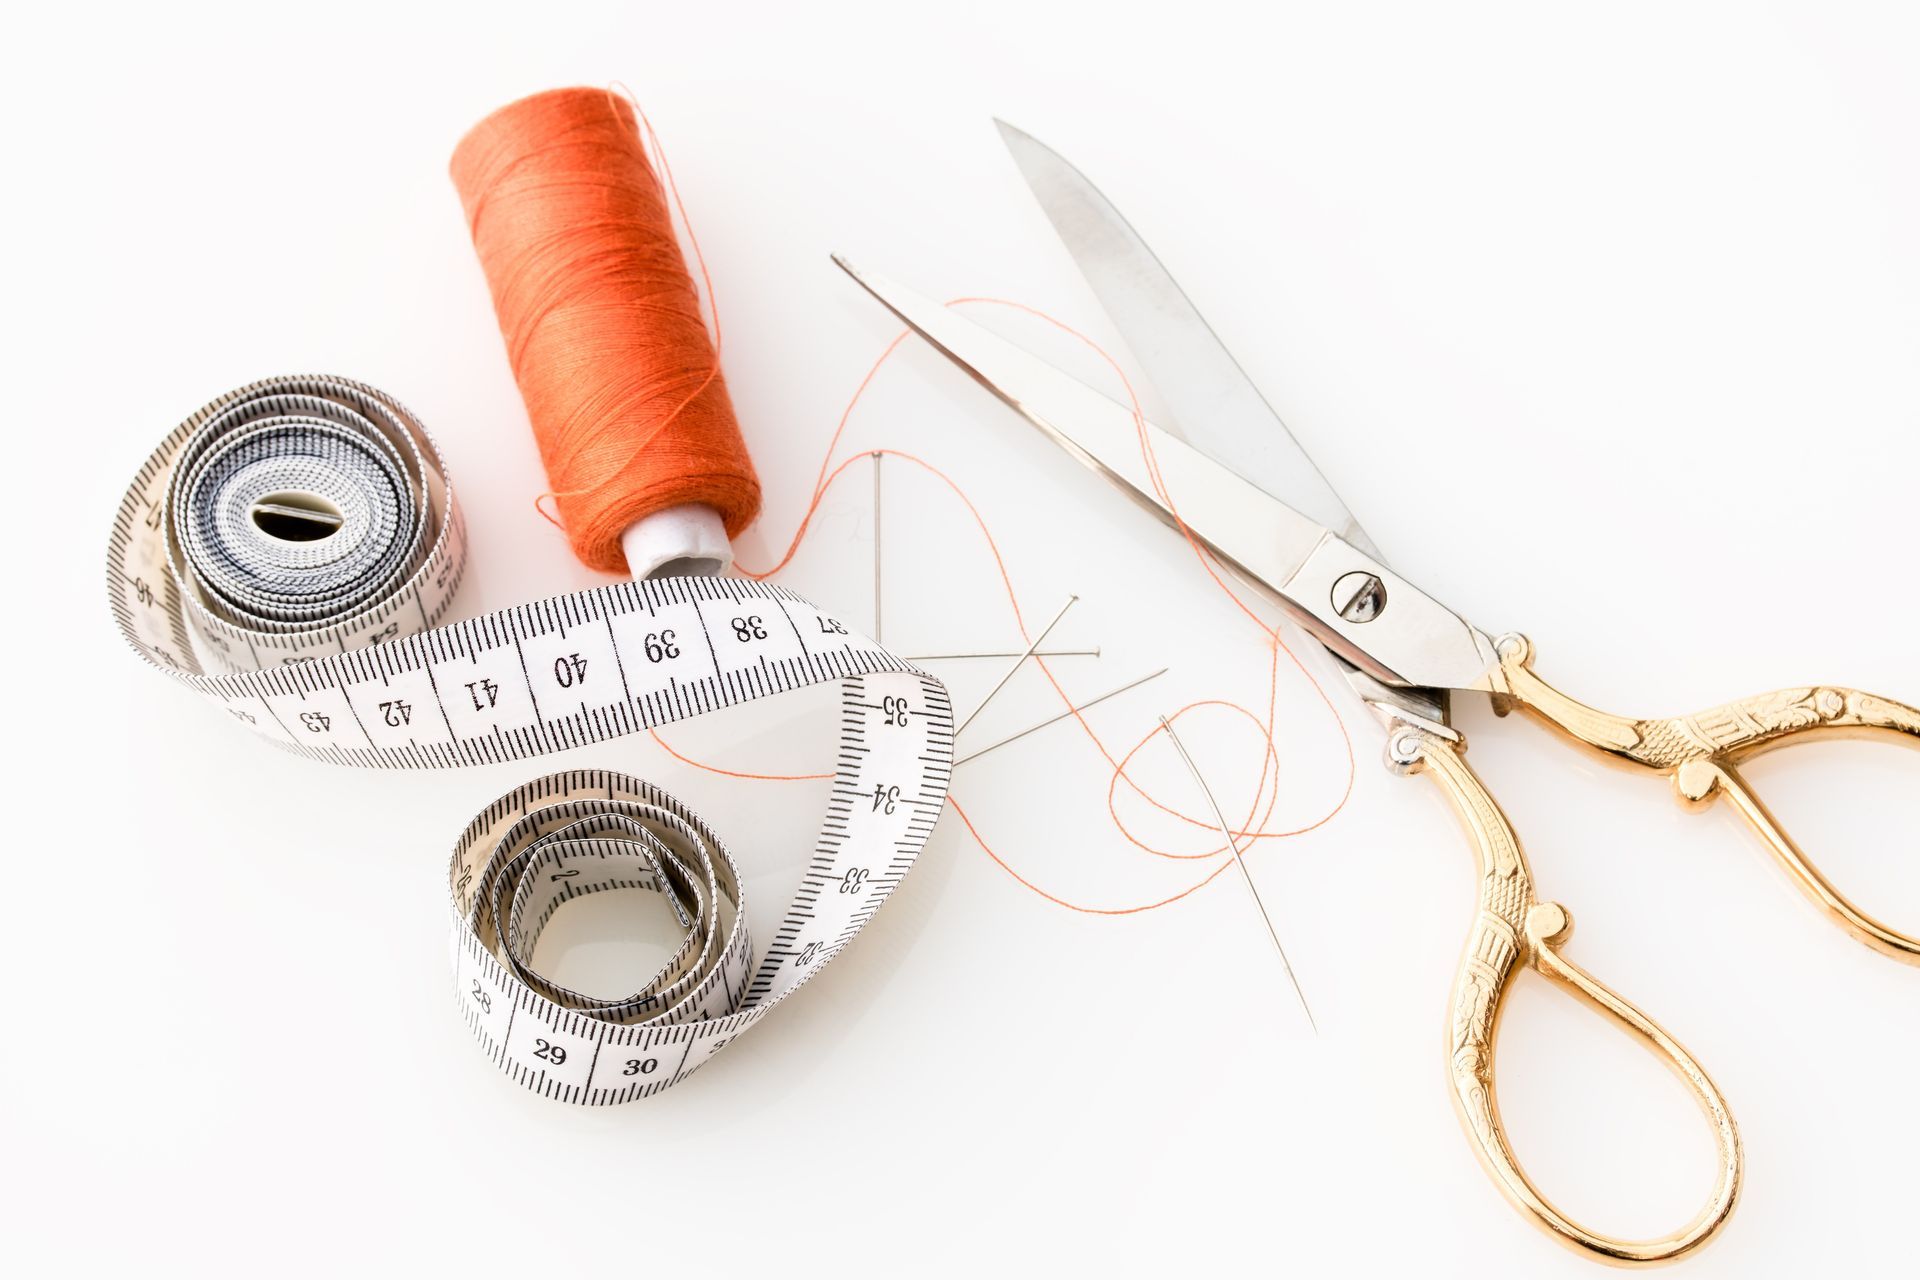 thread and fabric scissors— Sewing Machines in Coffs Harbour, NSW